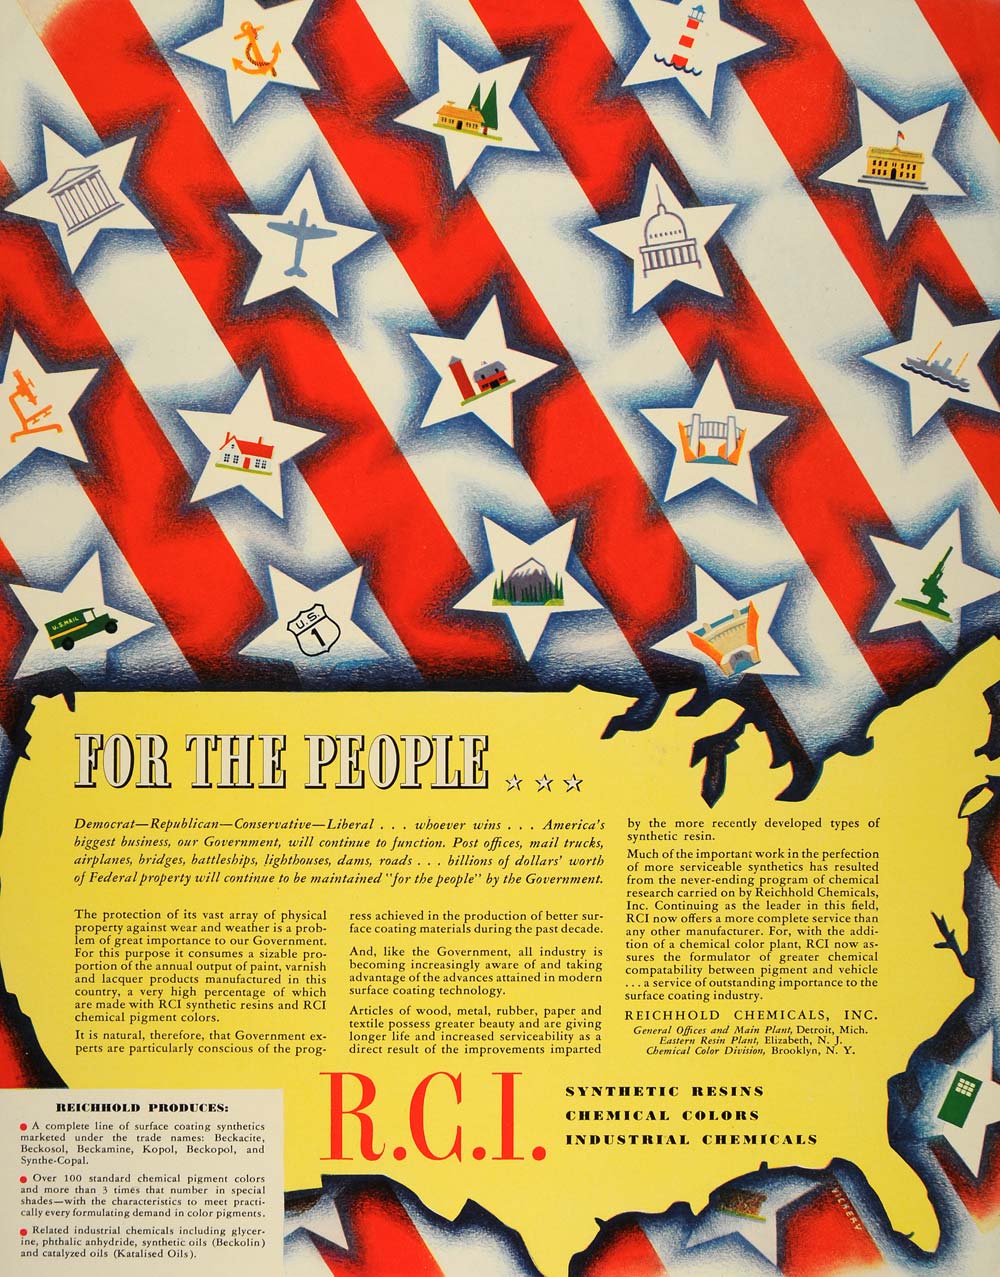 1940 Ad Reichhold Synthetic Resins Stars Stripes R.C.I. - ORIGINAL FT6